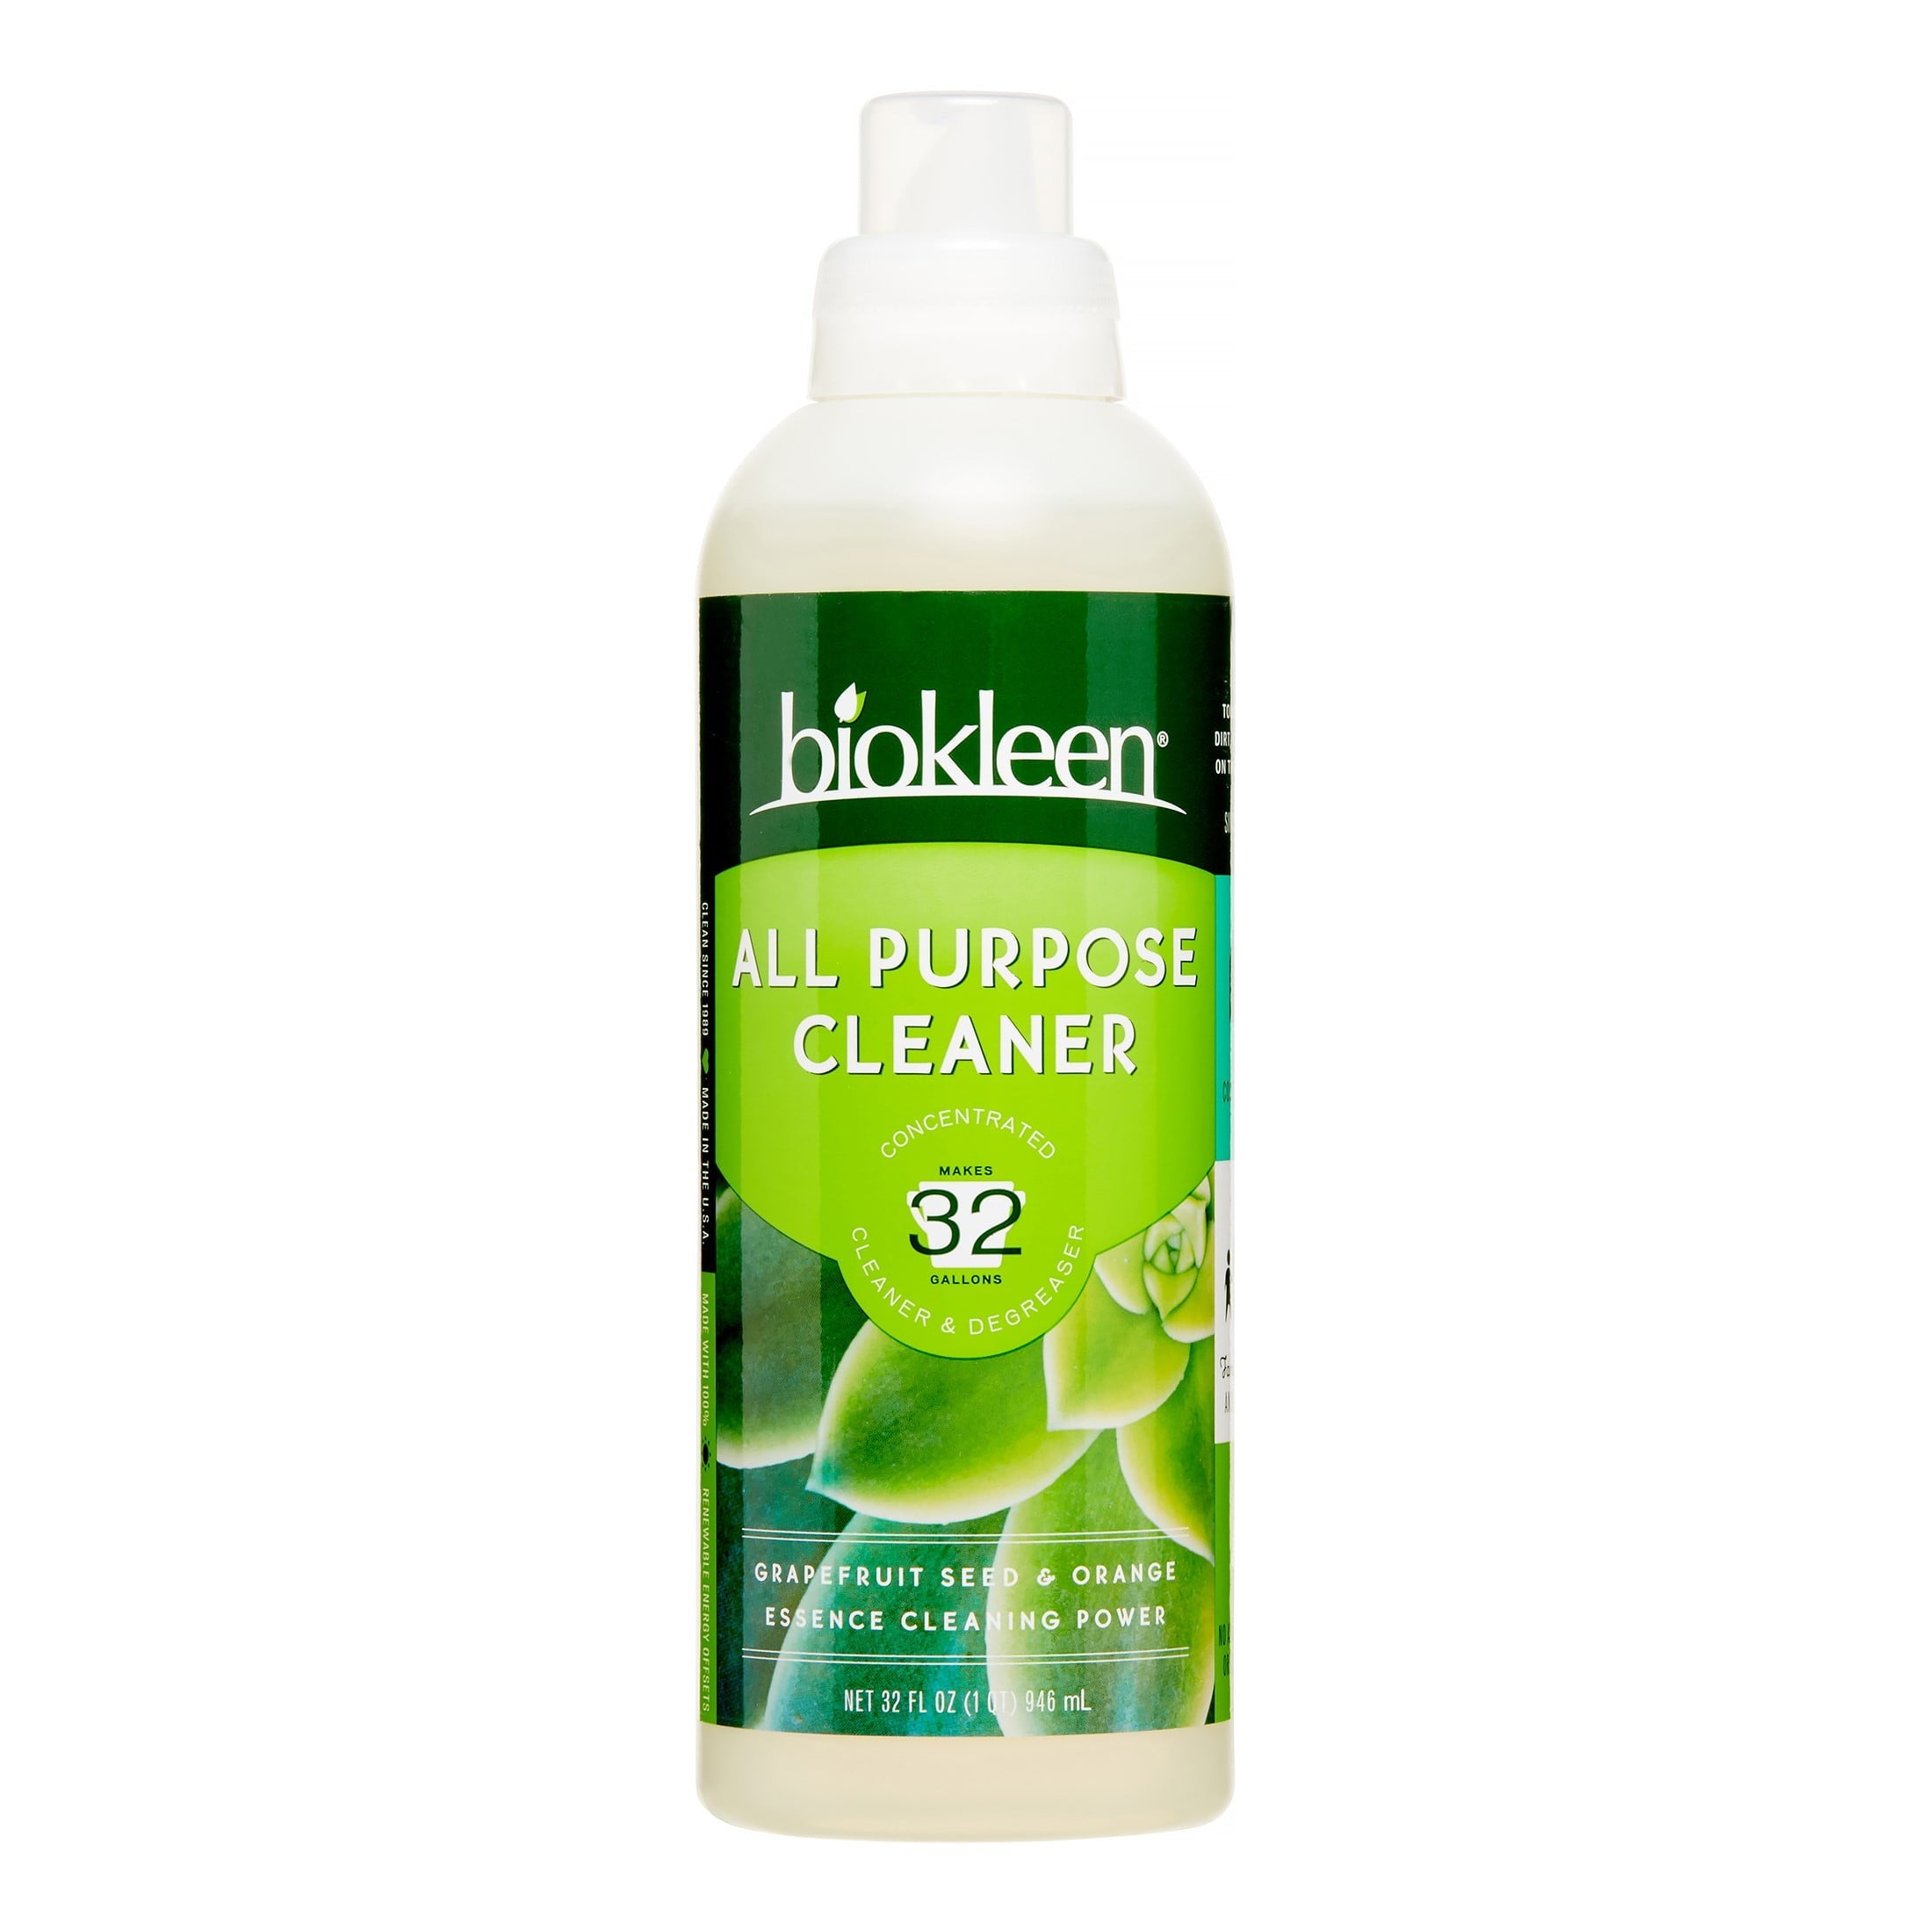 Bio Kleen All Purpose Cleaner Concentrated Cleaner & Degreaser 32 oz Bottle